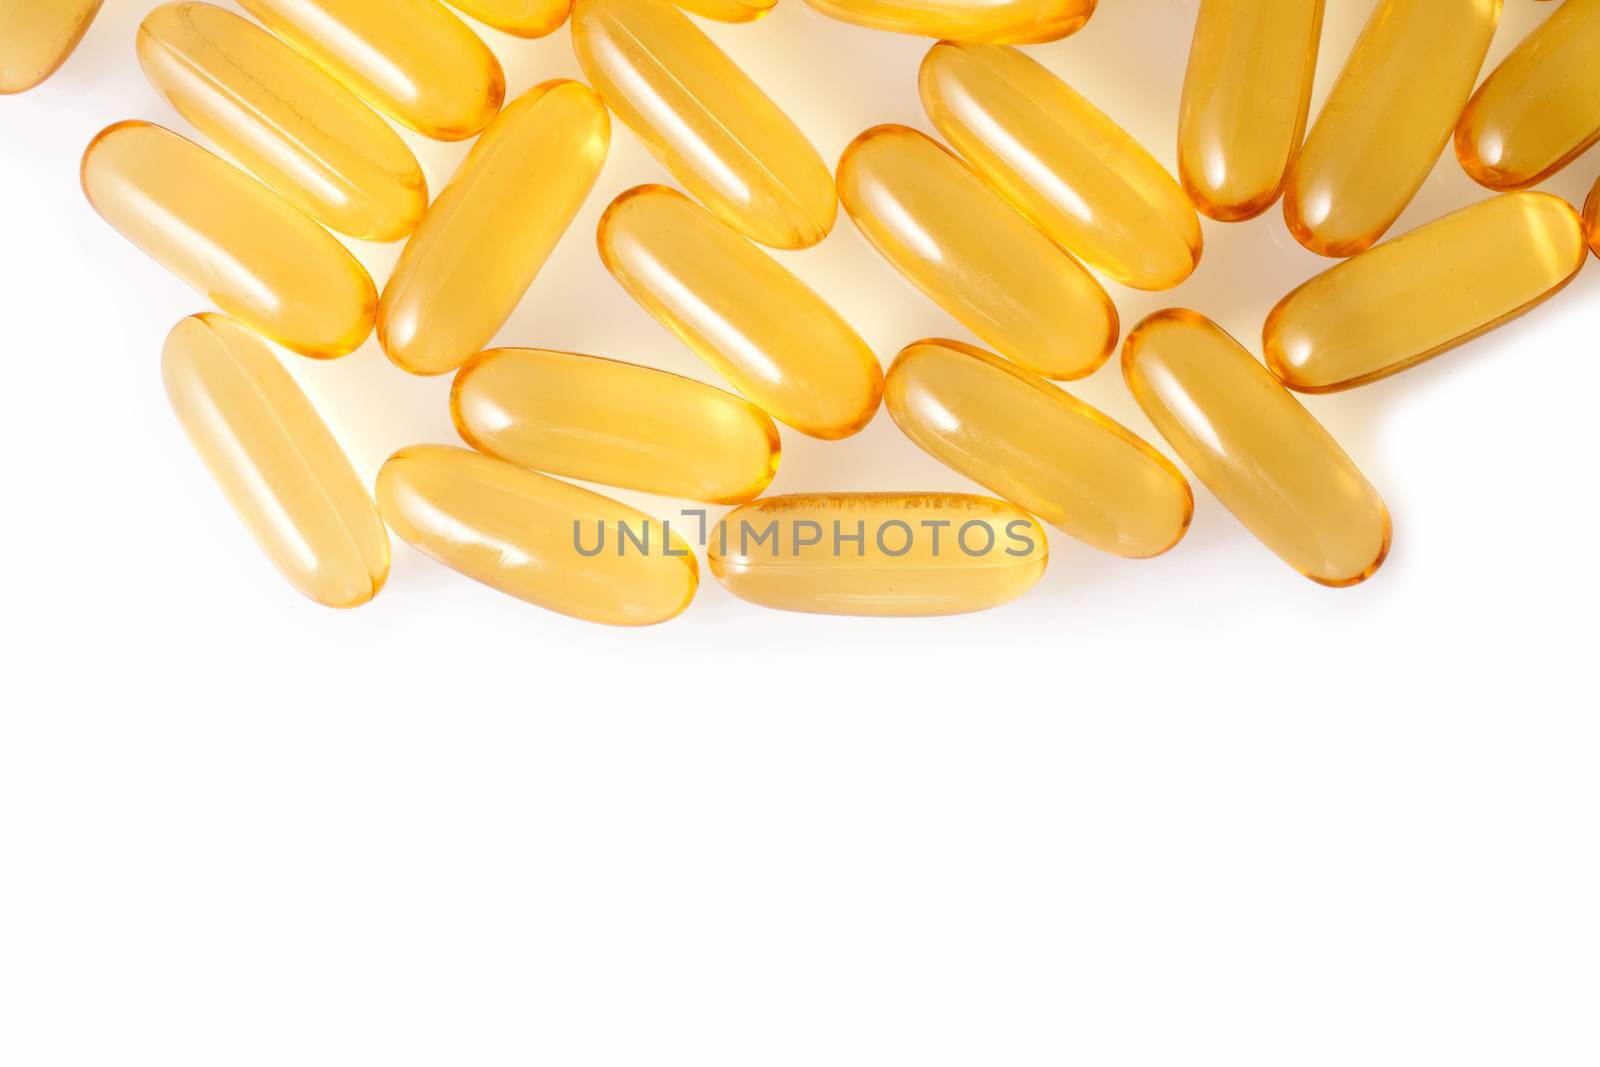 Oil vitamins capsule shapes on white background